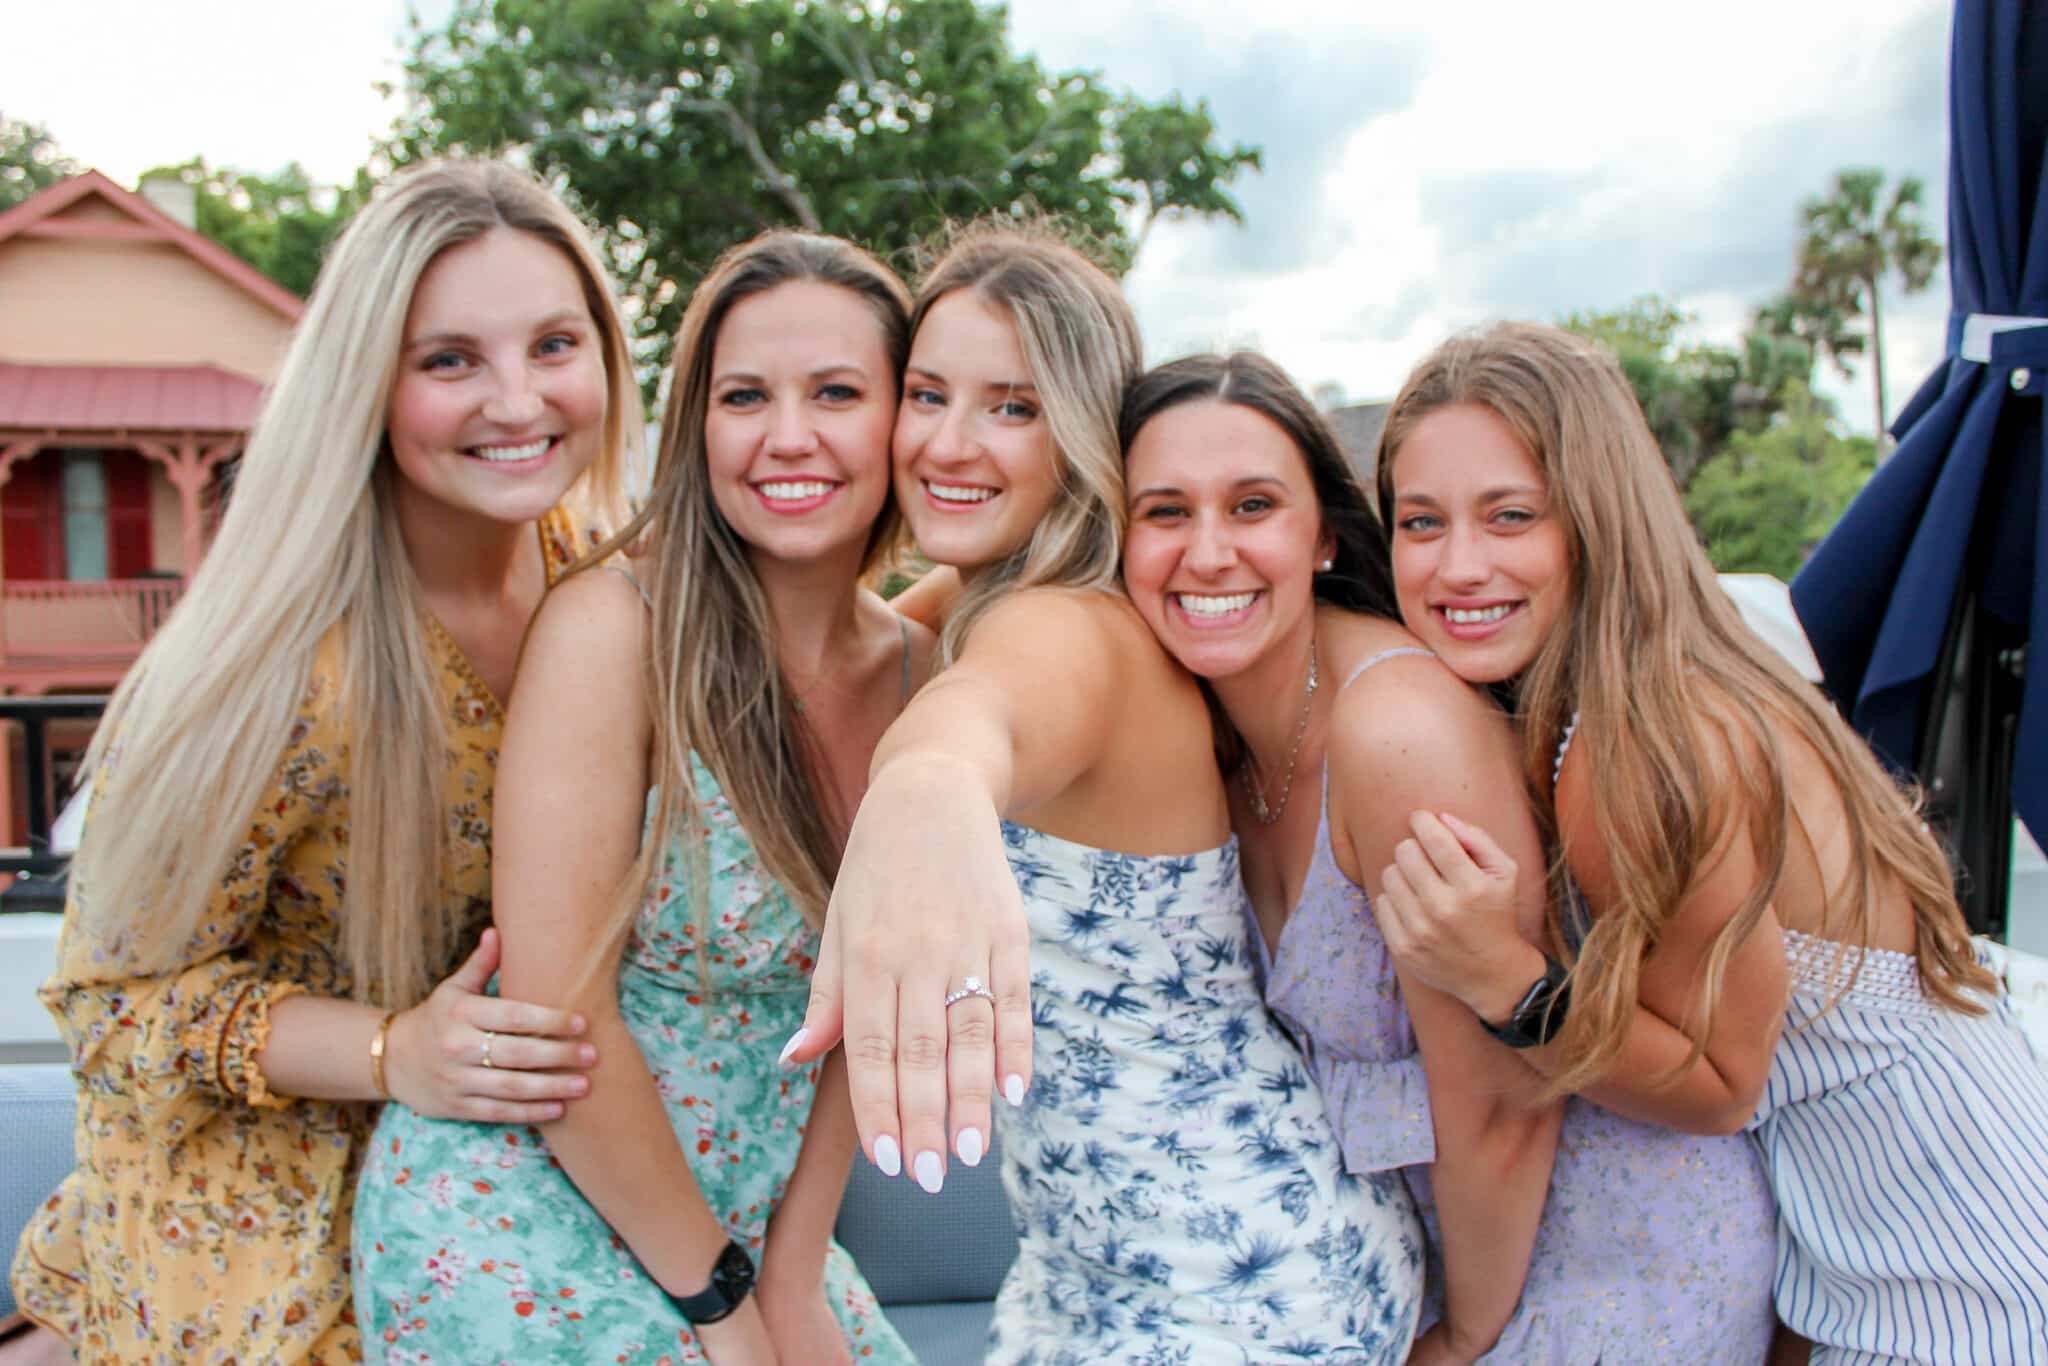 group of five girls stand together for picture smiling as girl in the middle holds out hand to show ring